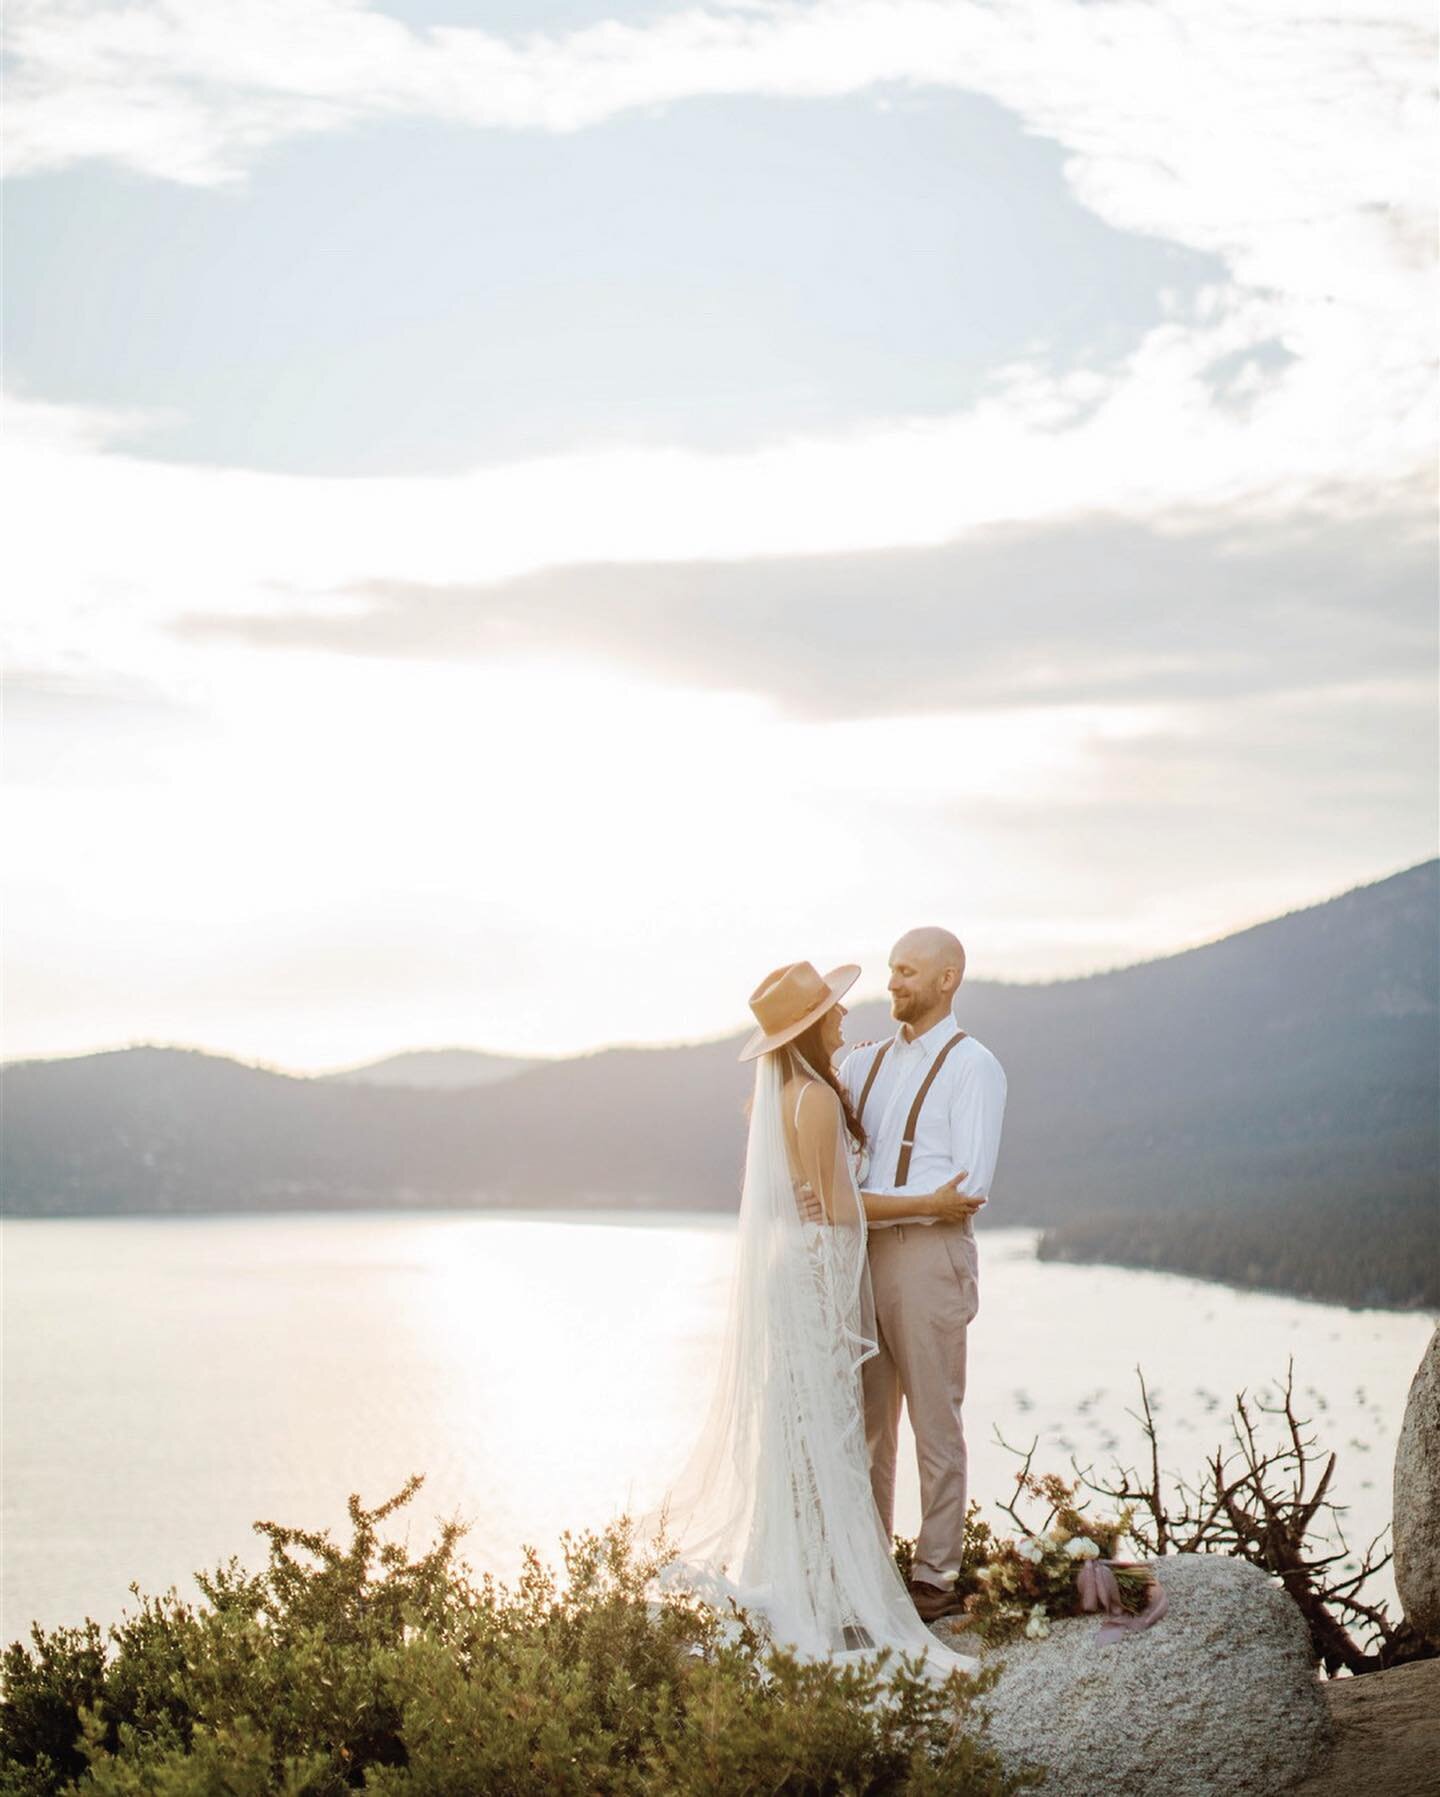 Felicia &amp; Bret wanted an intimate, personalized experience that highlighted their love of Tahoe, adventure &amp; each other. I have to say: we totally accomplished that.
⠀⠀⠀⠀⠀⠀⠀⠀⠀
Felicia&rsquo;s sister, Tessa, officiated the ceremony. It was so 